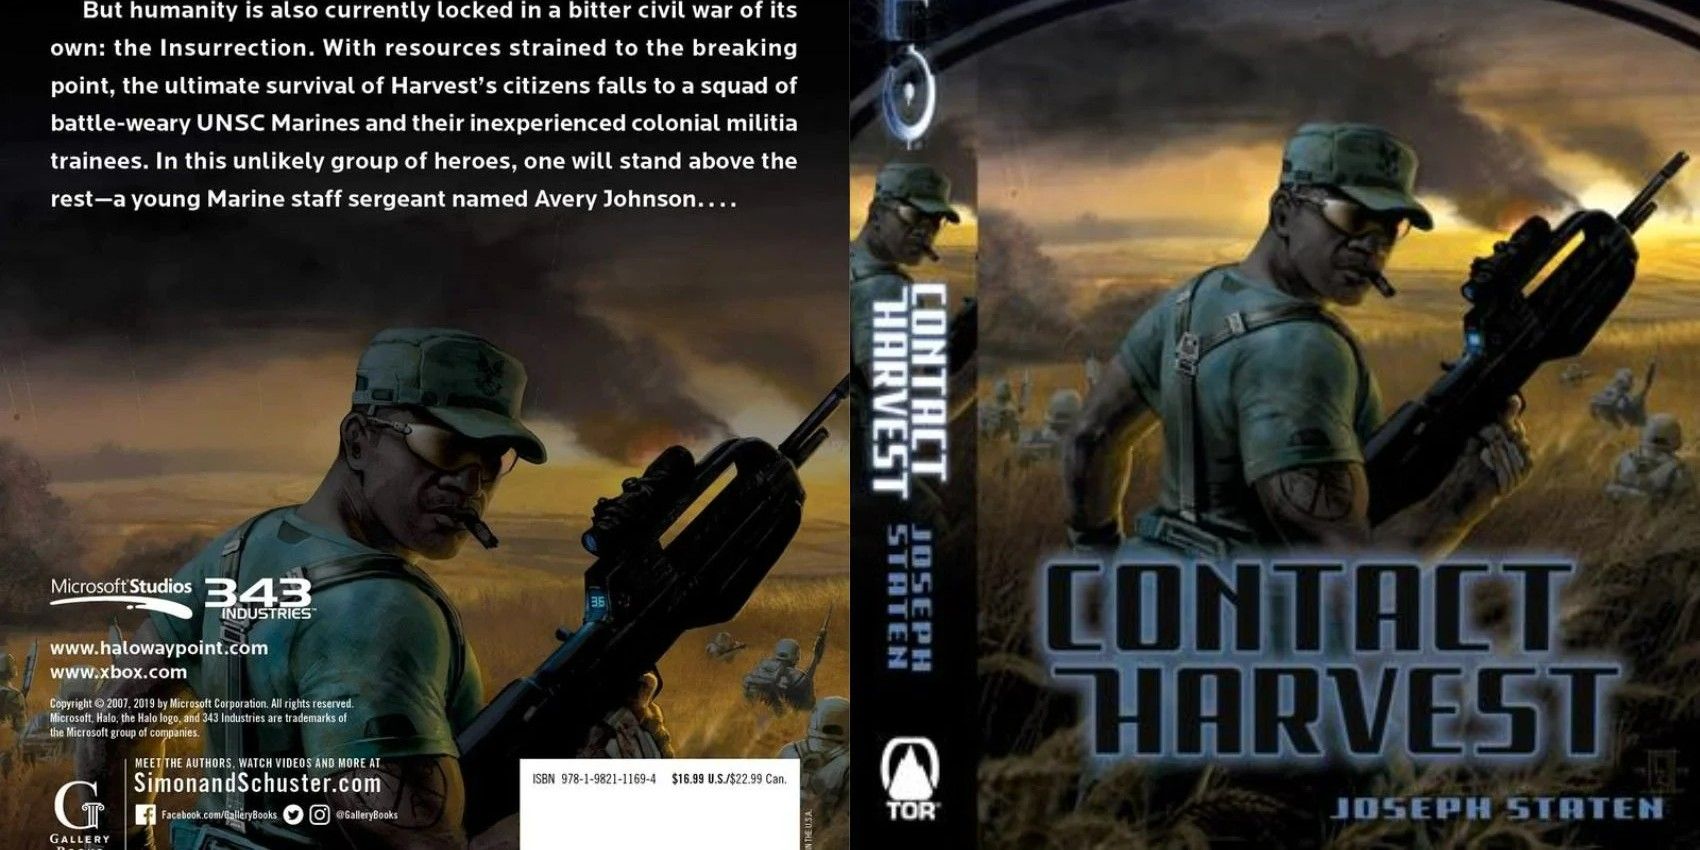 Contact Harvest Full Book Cover 